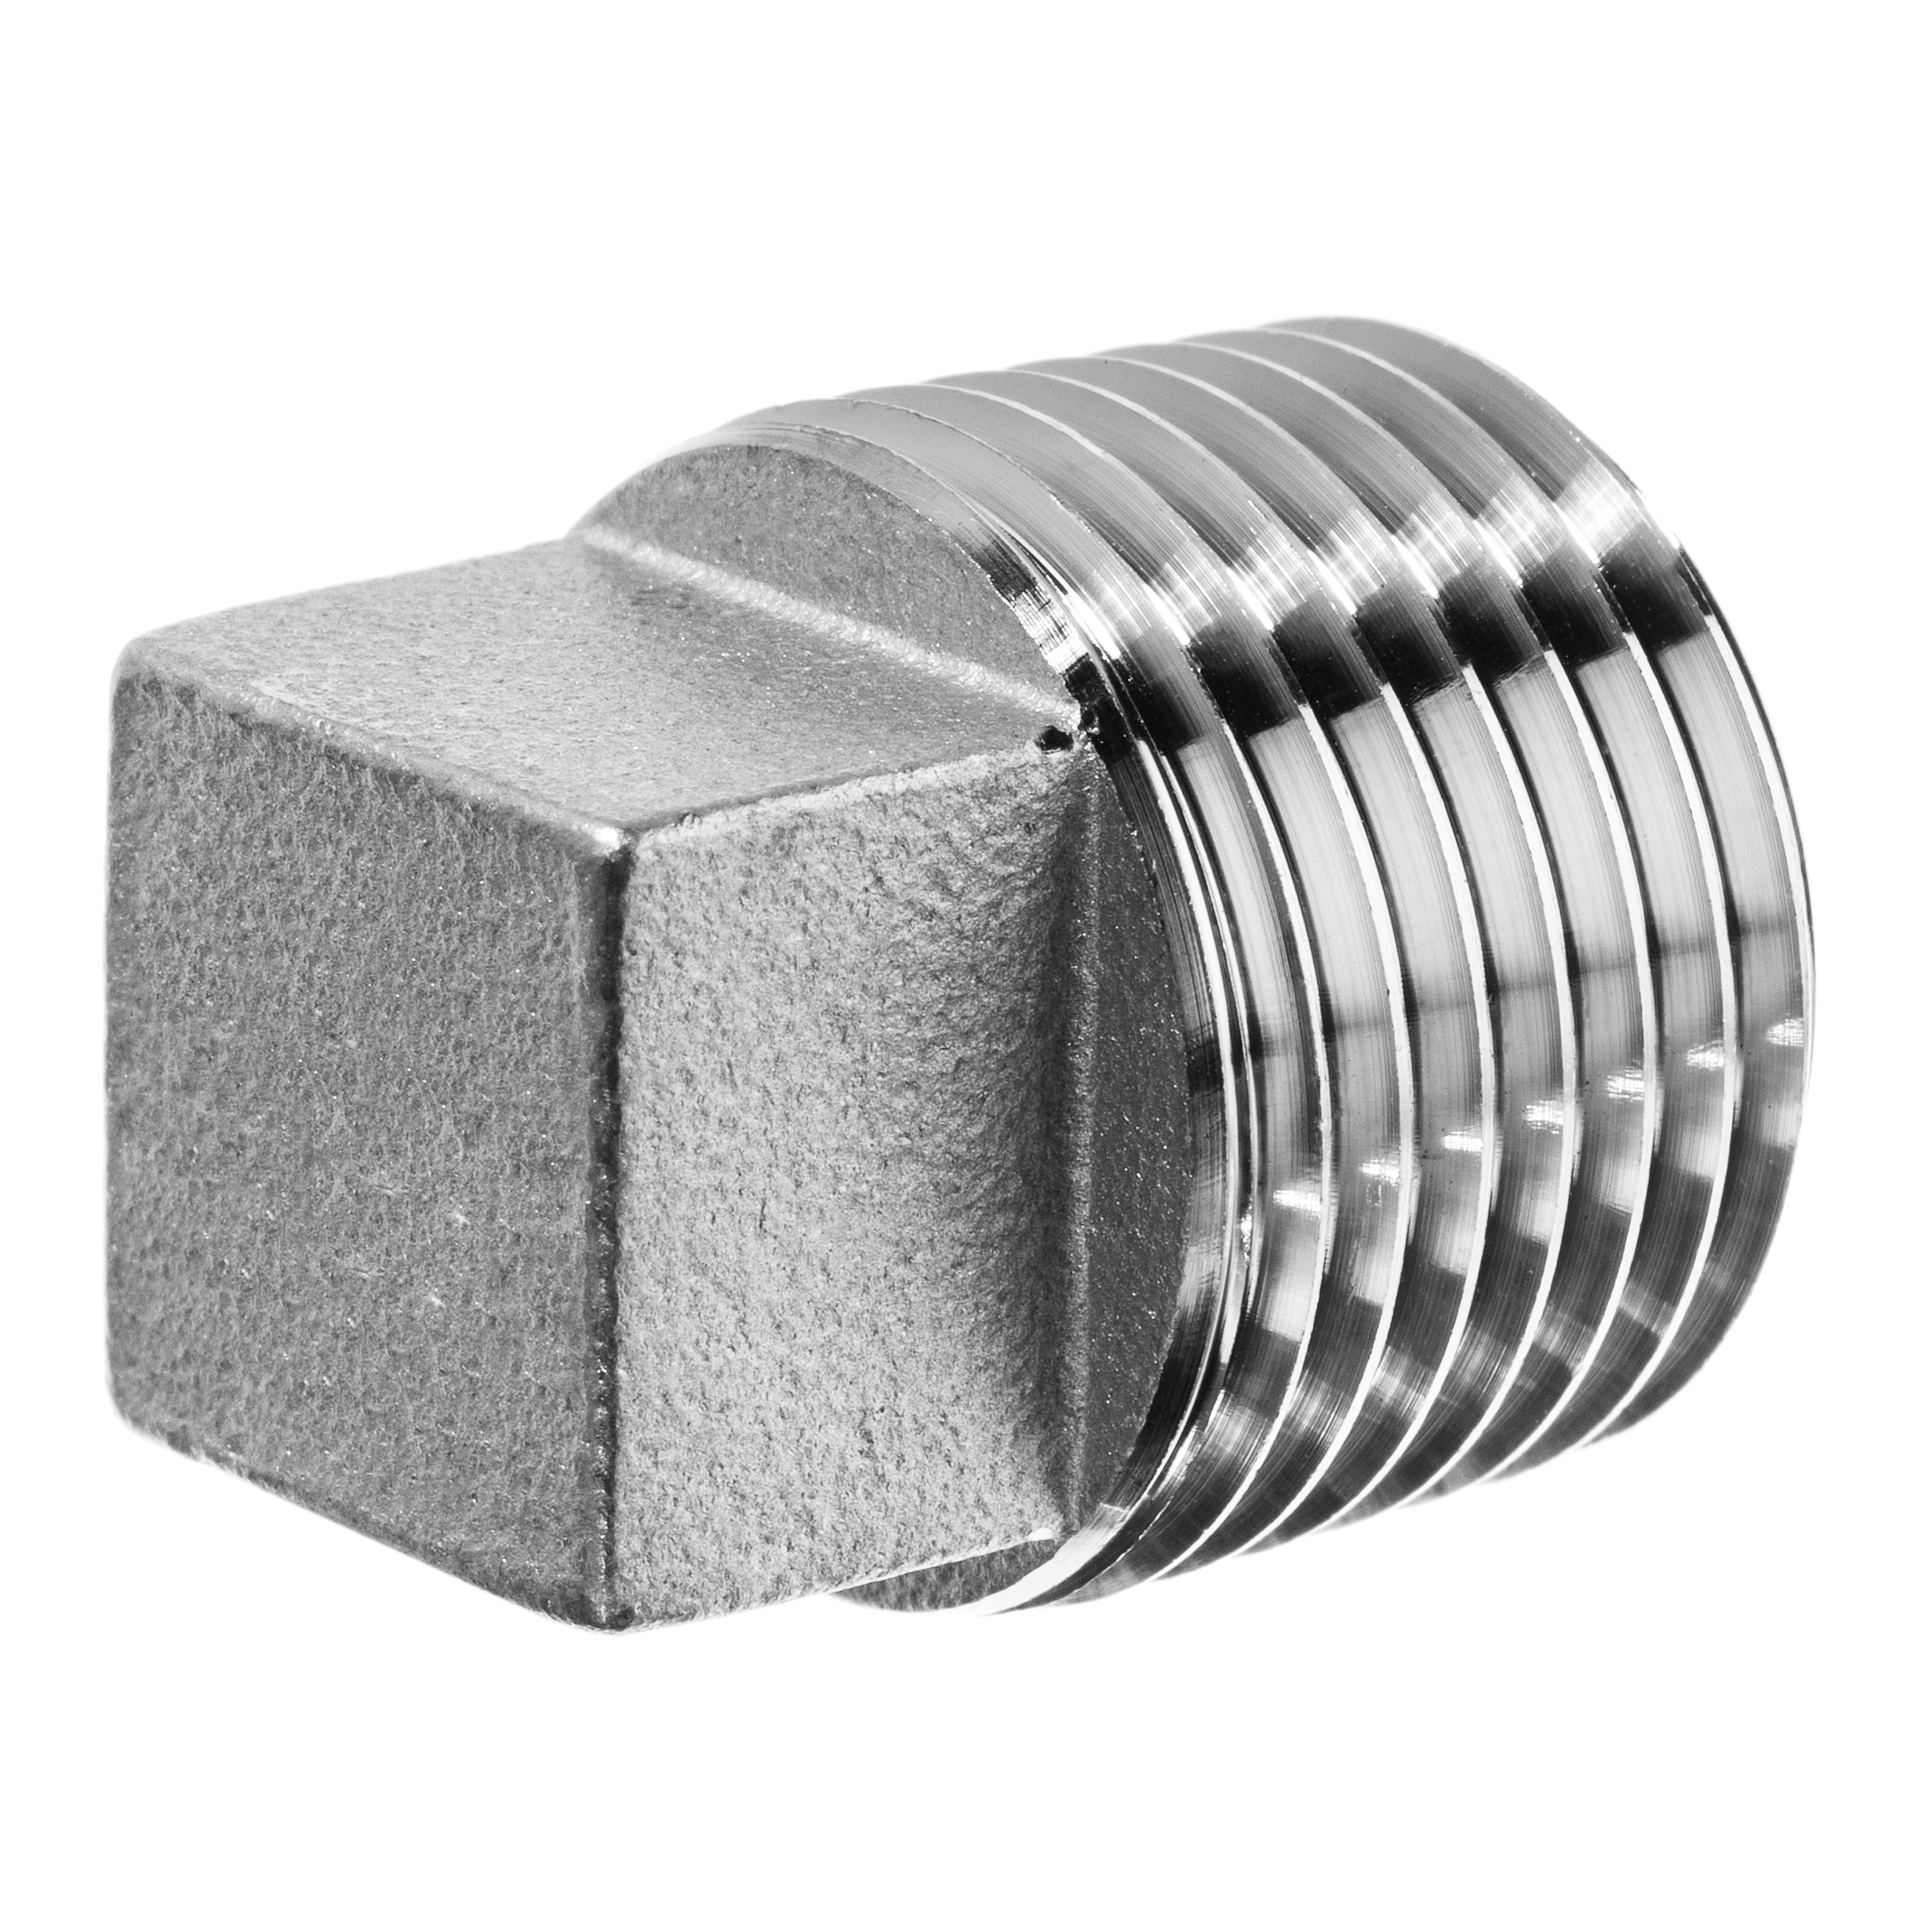 Pipe Fitting - Square Head Plug , Male BSPT, 304 Stainless Steel, Class 150